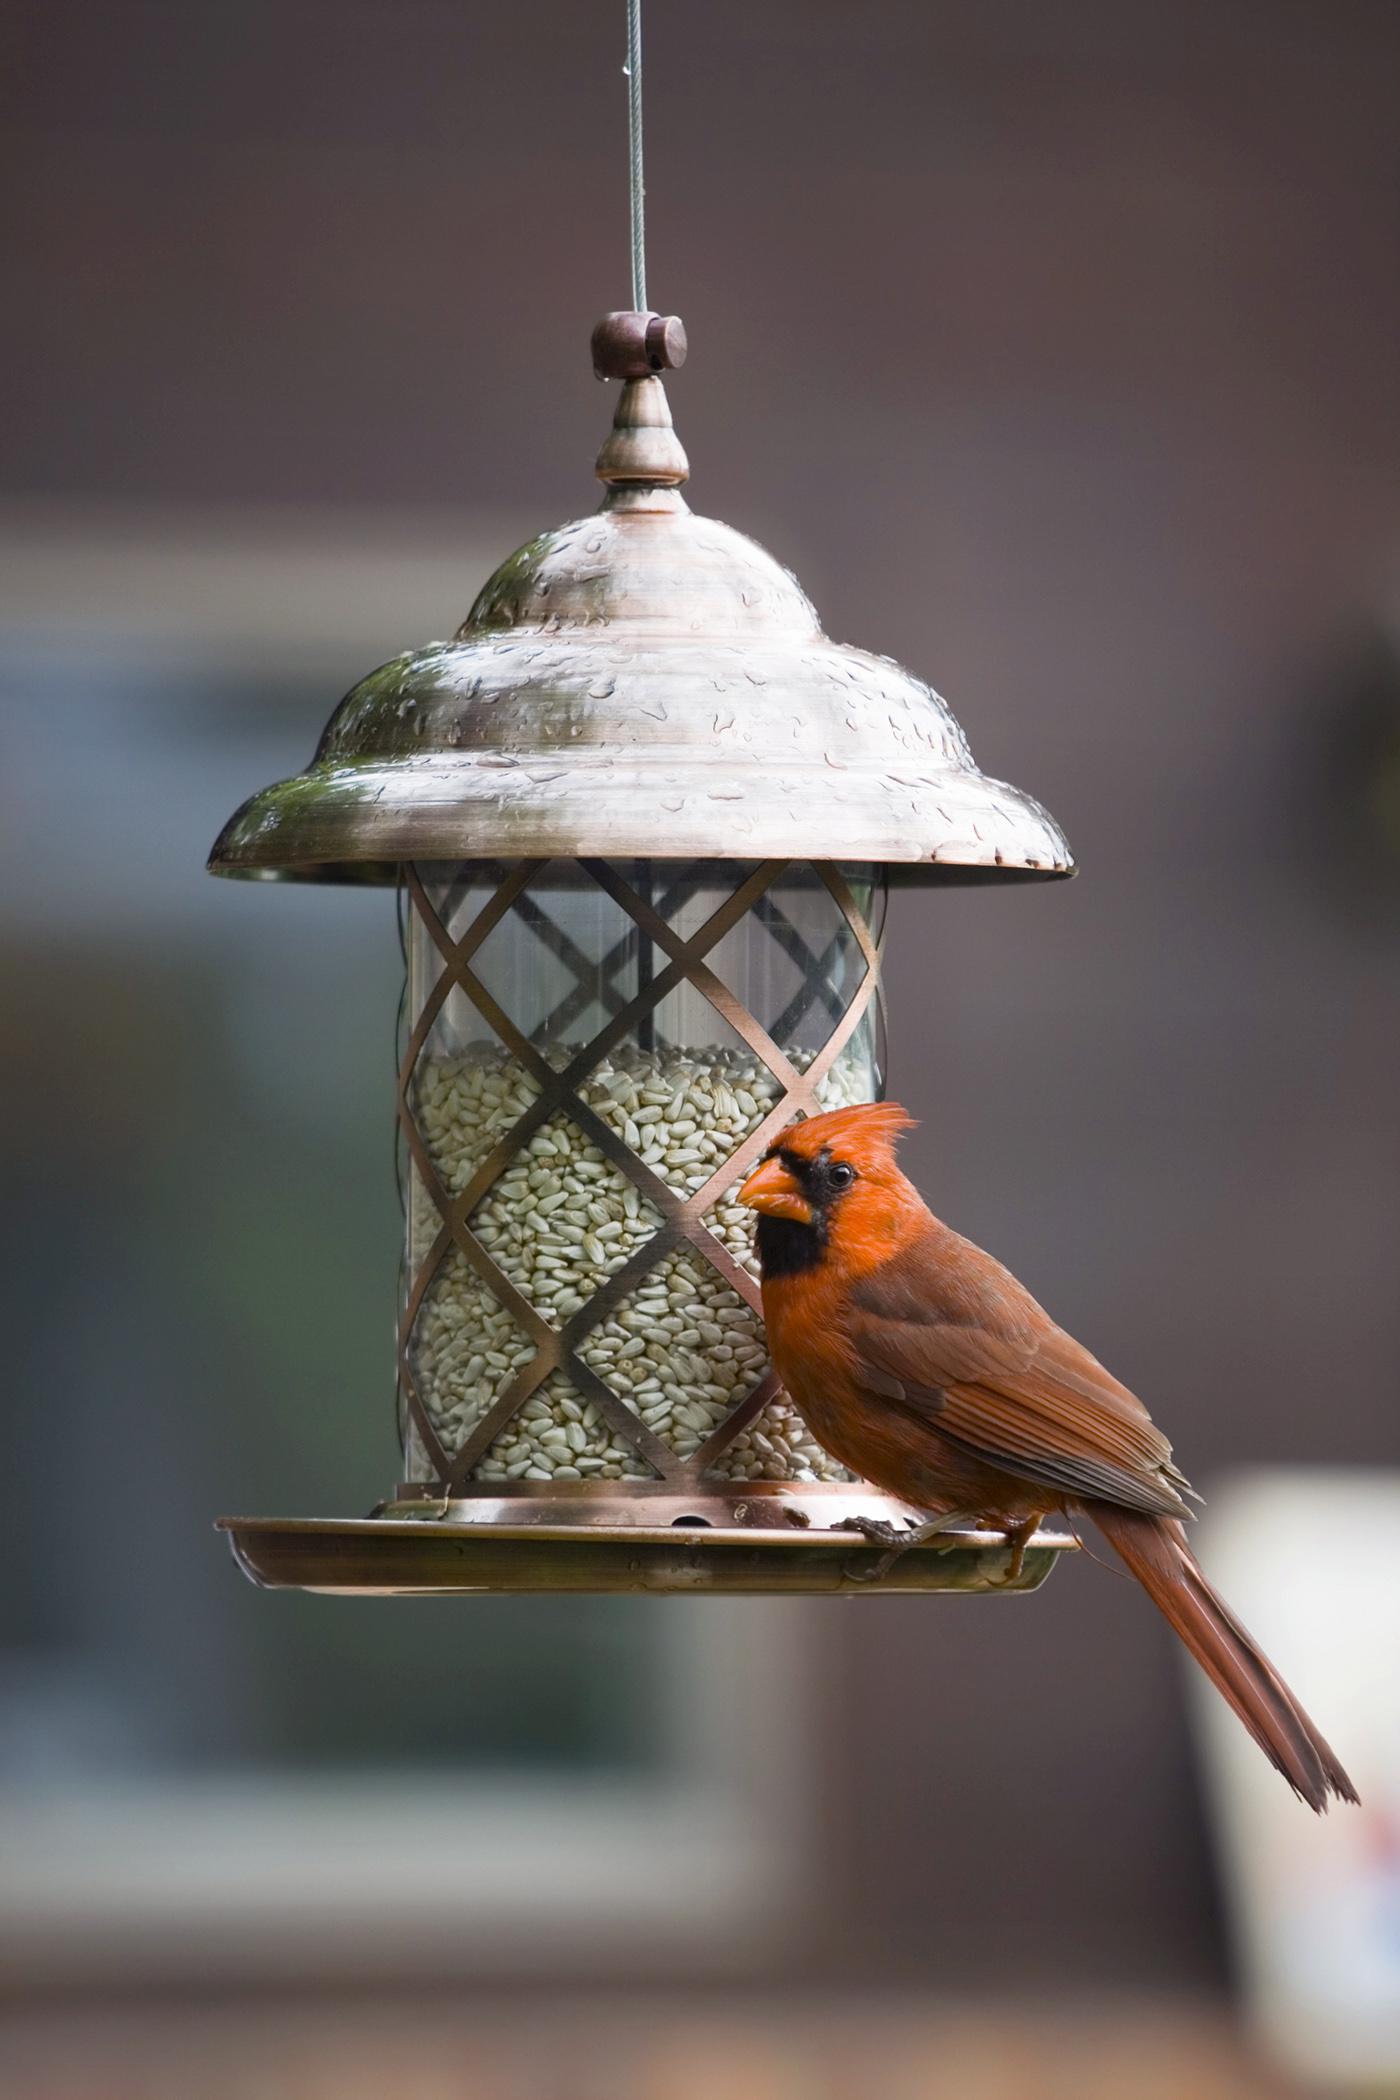 Winter's chill presents a perfect opportunity for bird watching at feeders set up to accommodate feathered guests. (File photo)